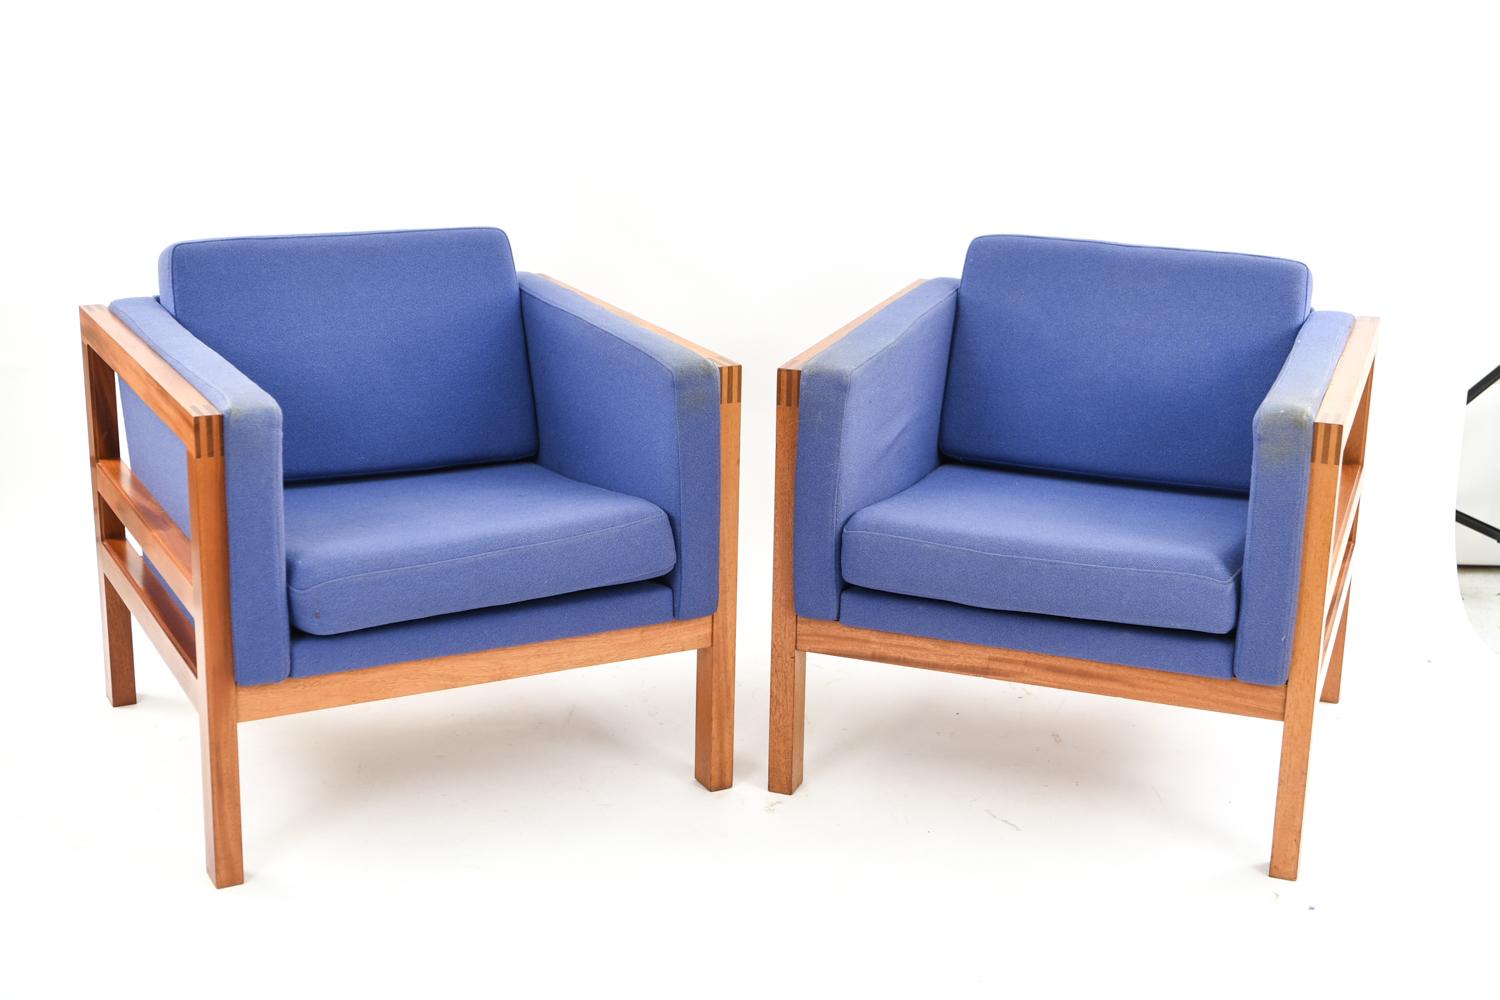 A beautiful pair of Danish midcentury lounge chairs by Christian Hvidt. With mahogany frames.